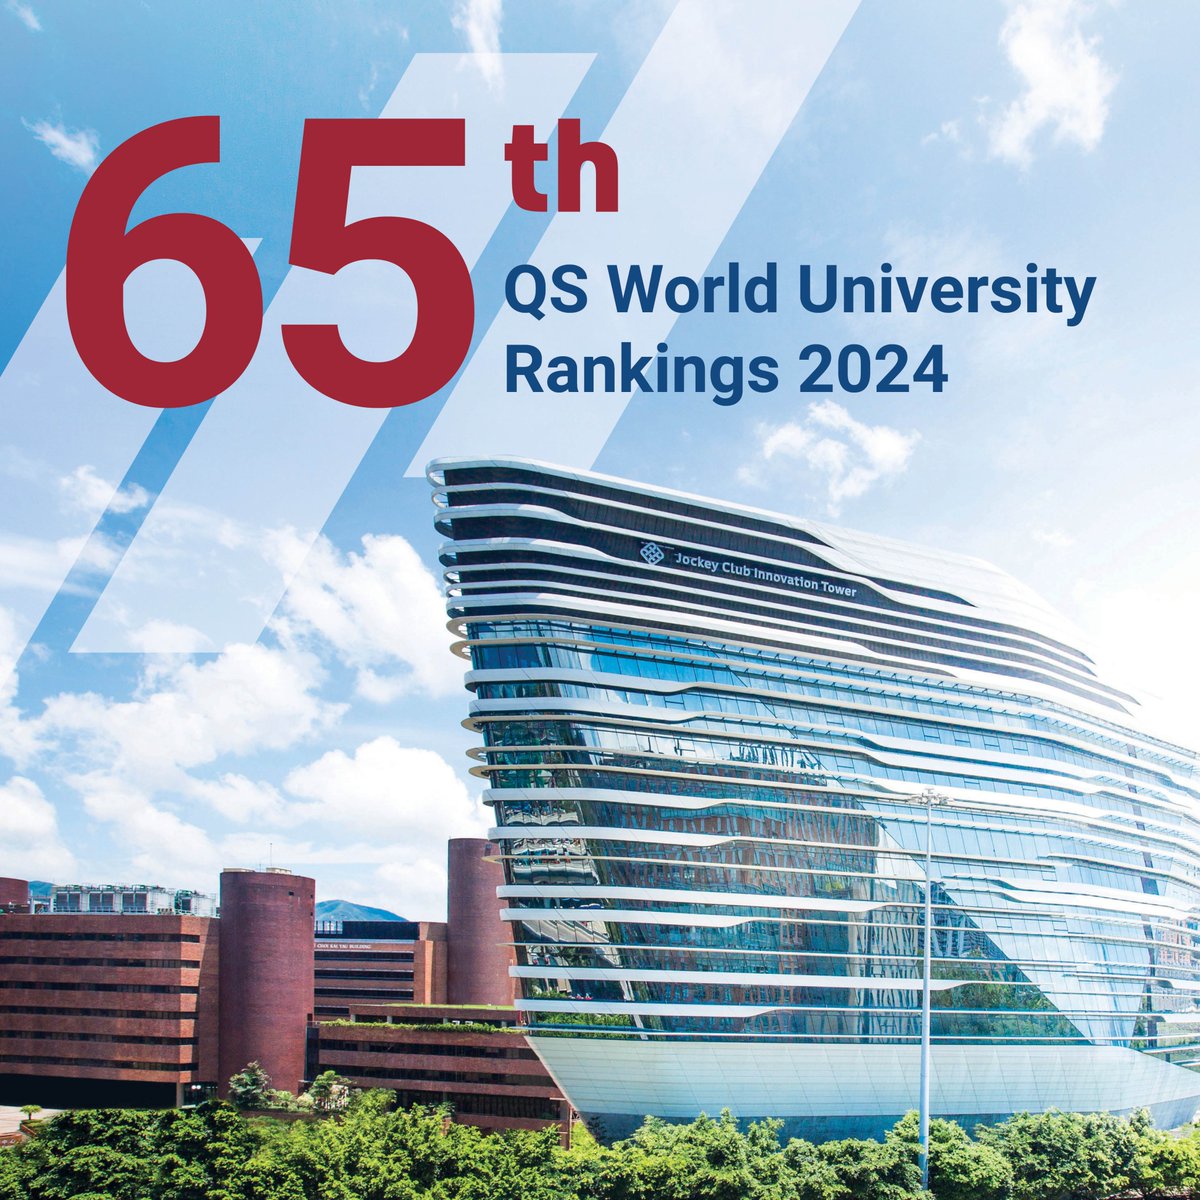 In the #QS World University Rankings 2024, #PolyU has achieved encouraging results, ranking 65th globally! @TopUnis